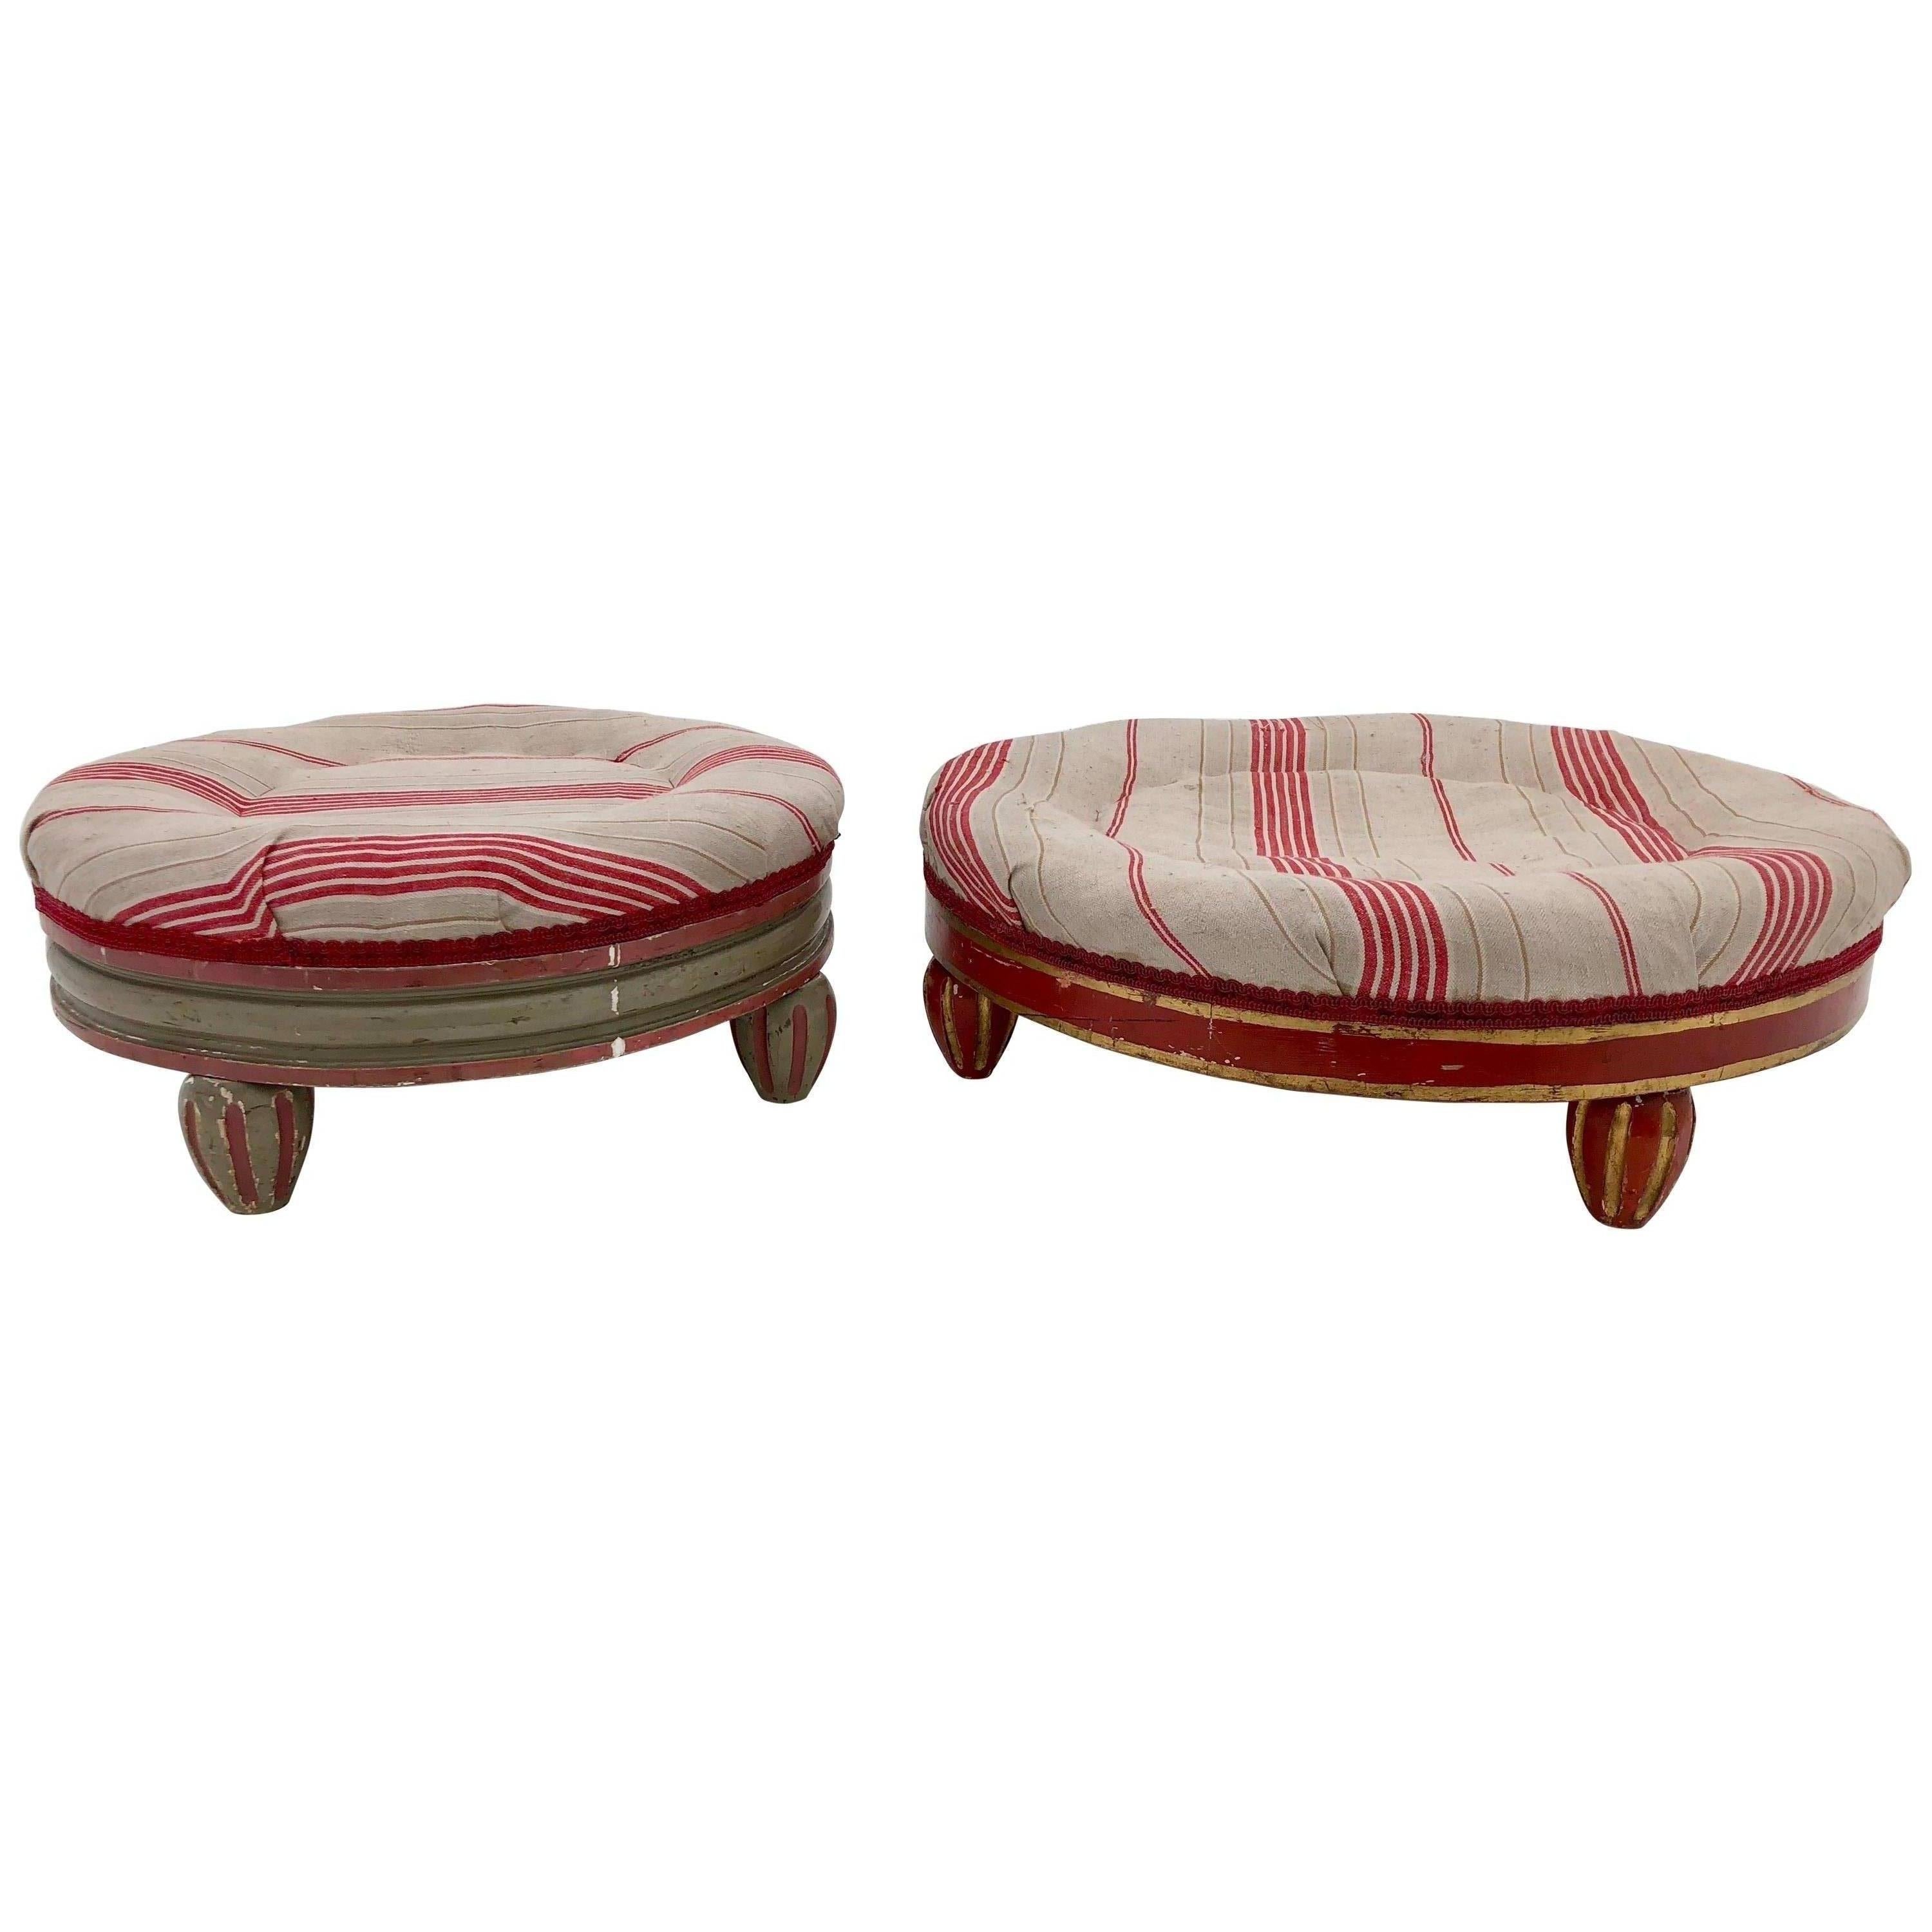 Two French Round Footstools Padded with Hay, Red Stripe Linen Tops, Late 1800s